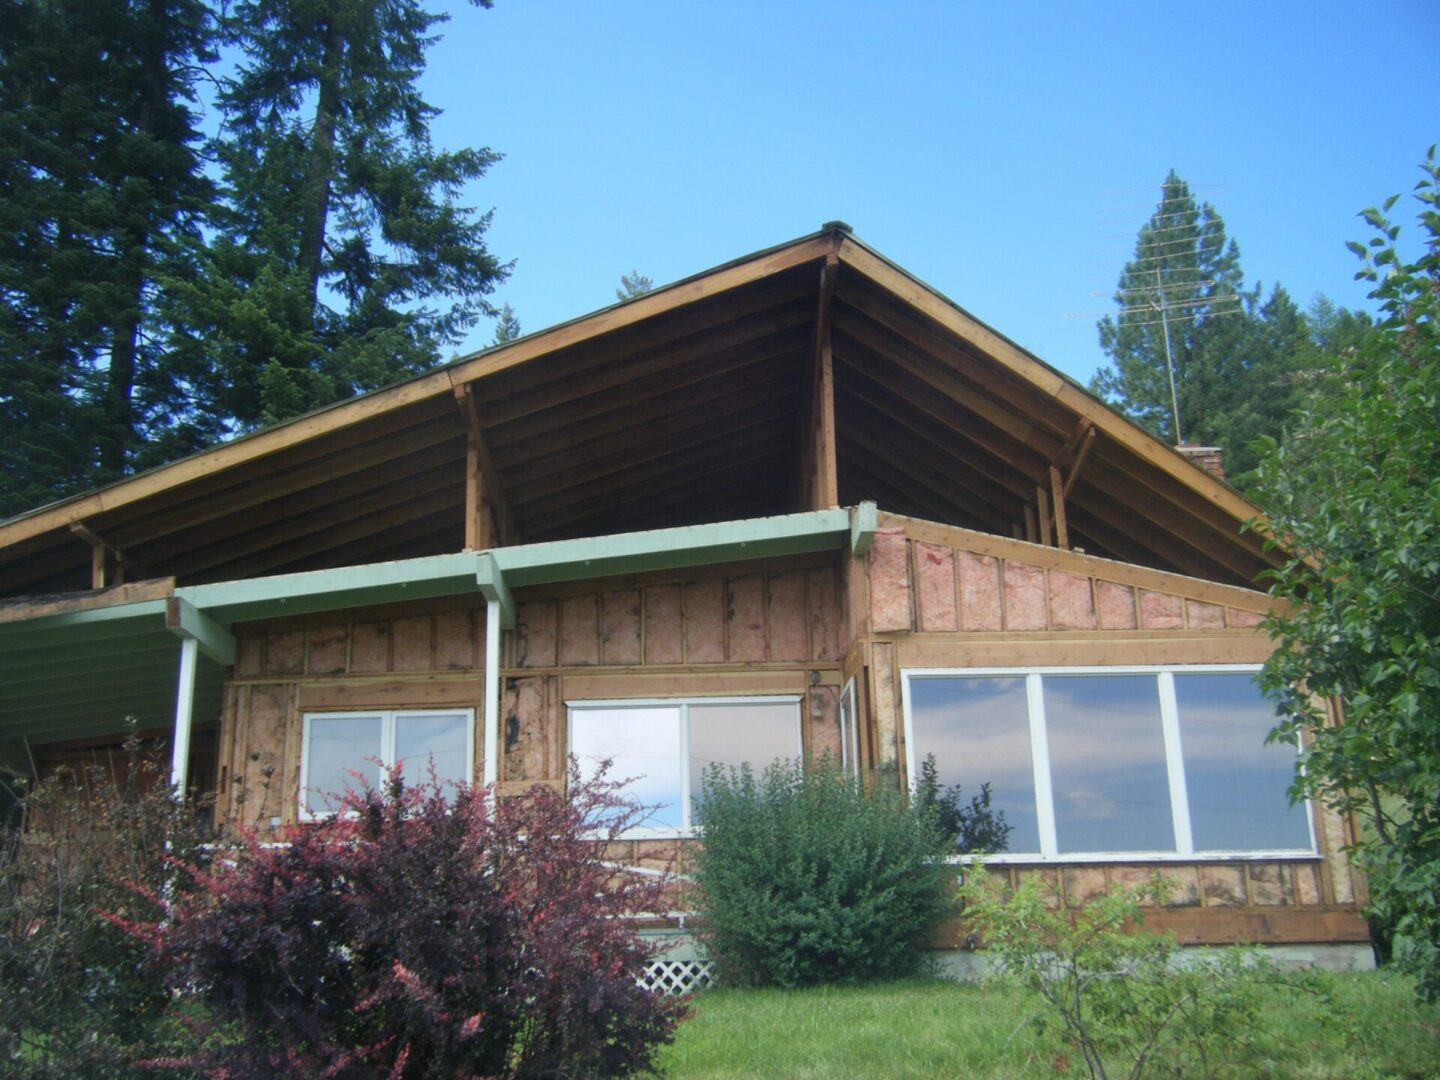 Front view of a bungalow home with its roof being constructed